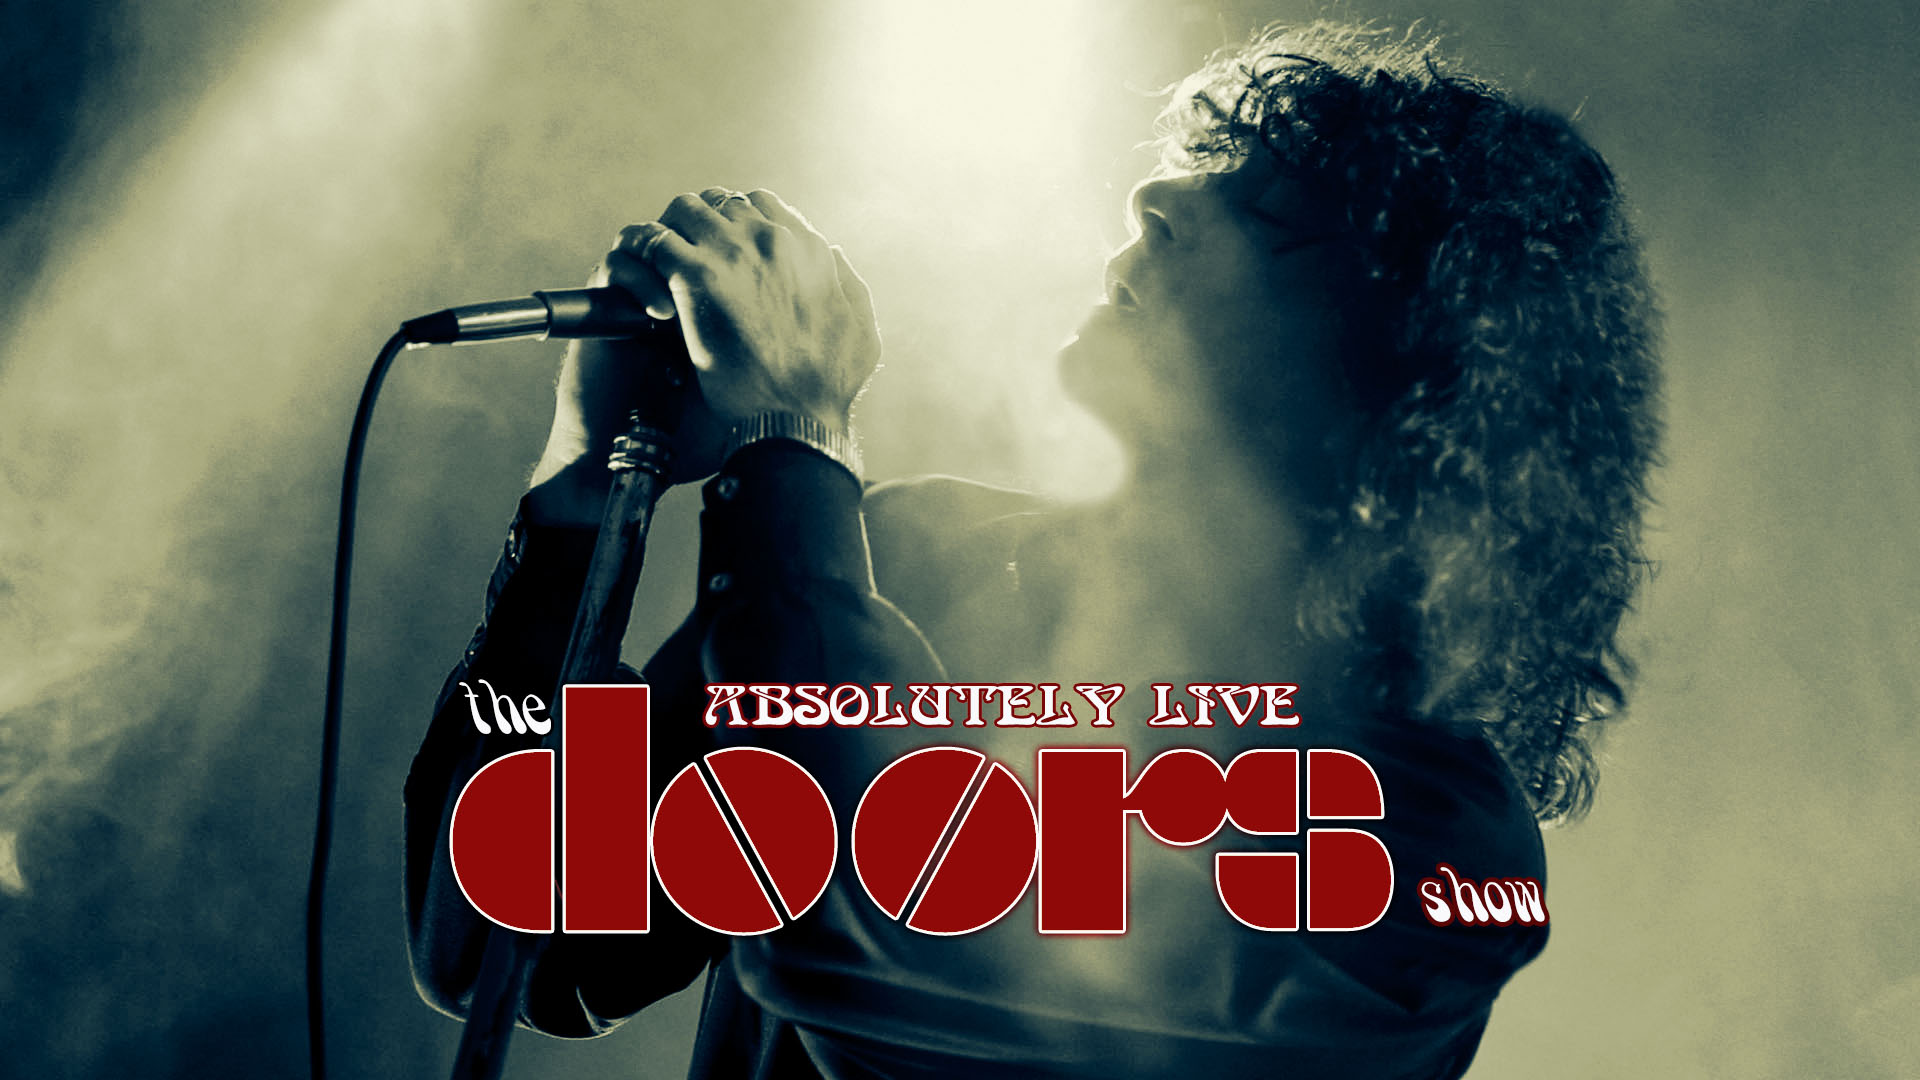 Absolutely-Live-–-The-Doors-Show